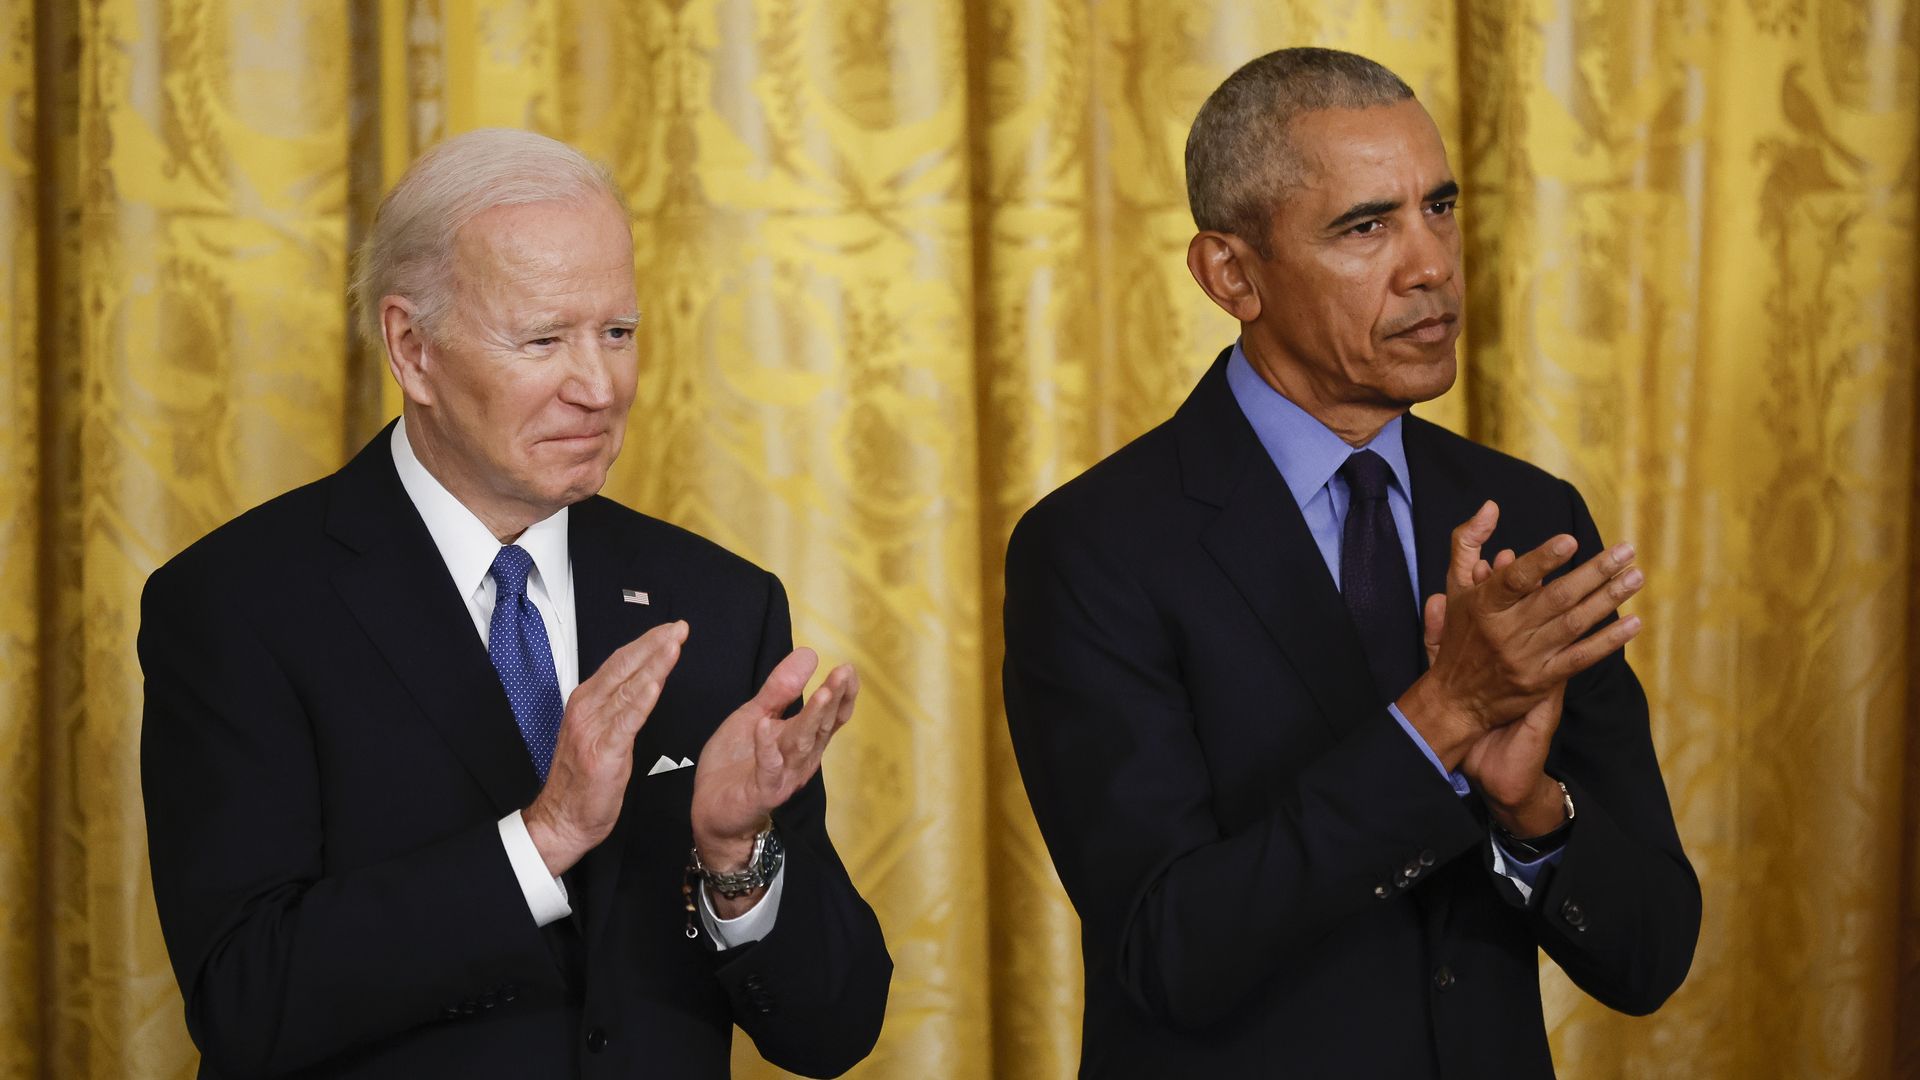 Picture of Biden and Obama